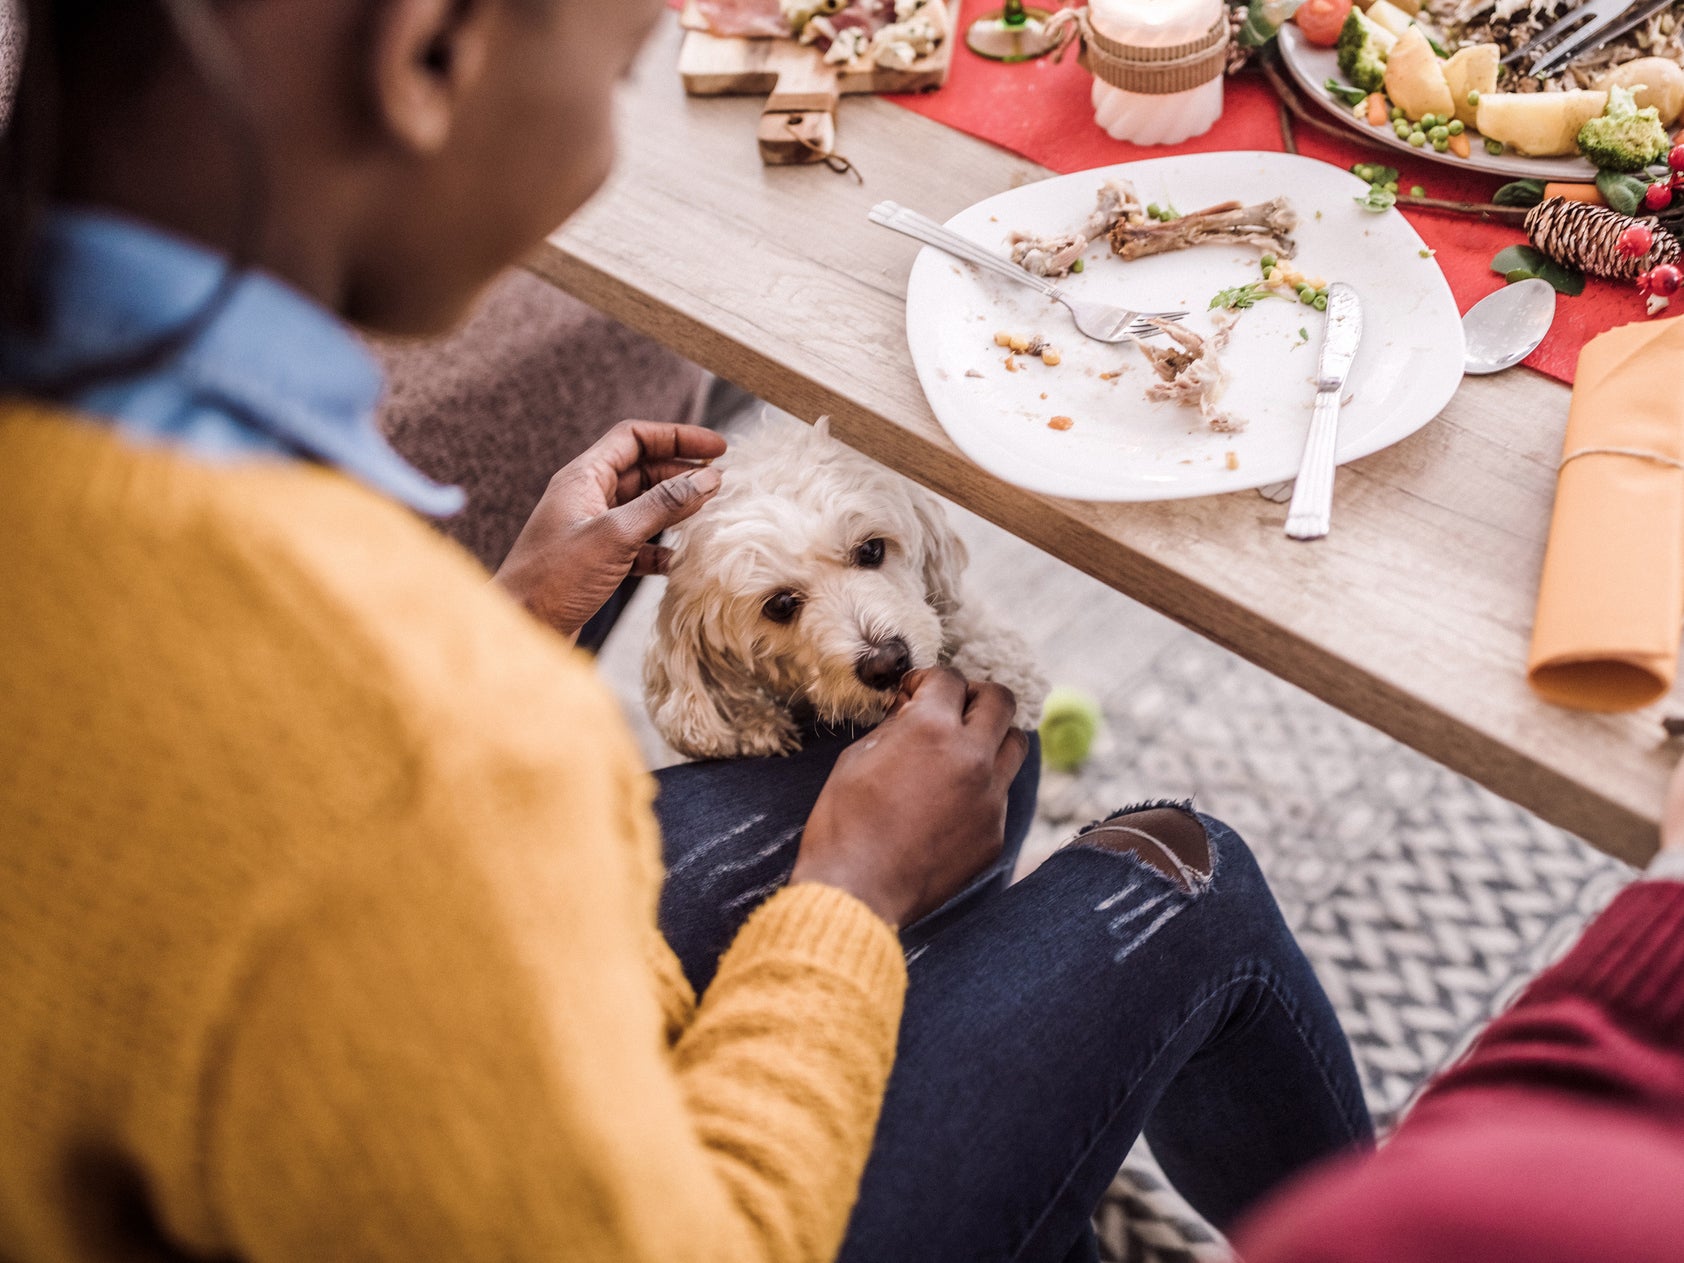 The Christmas foods you should not feed your pets at the dinner table